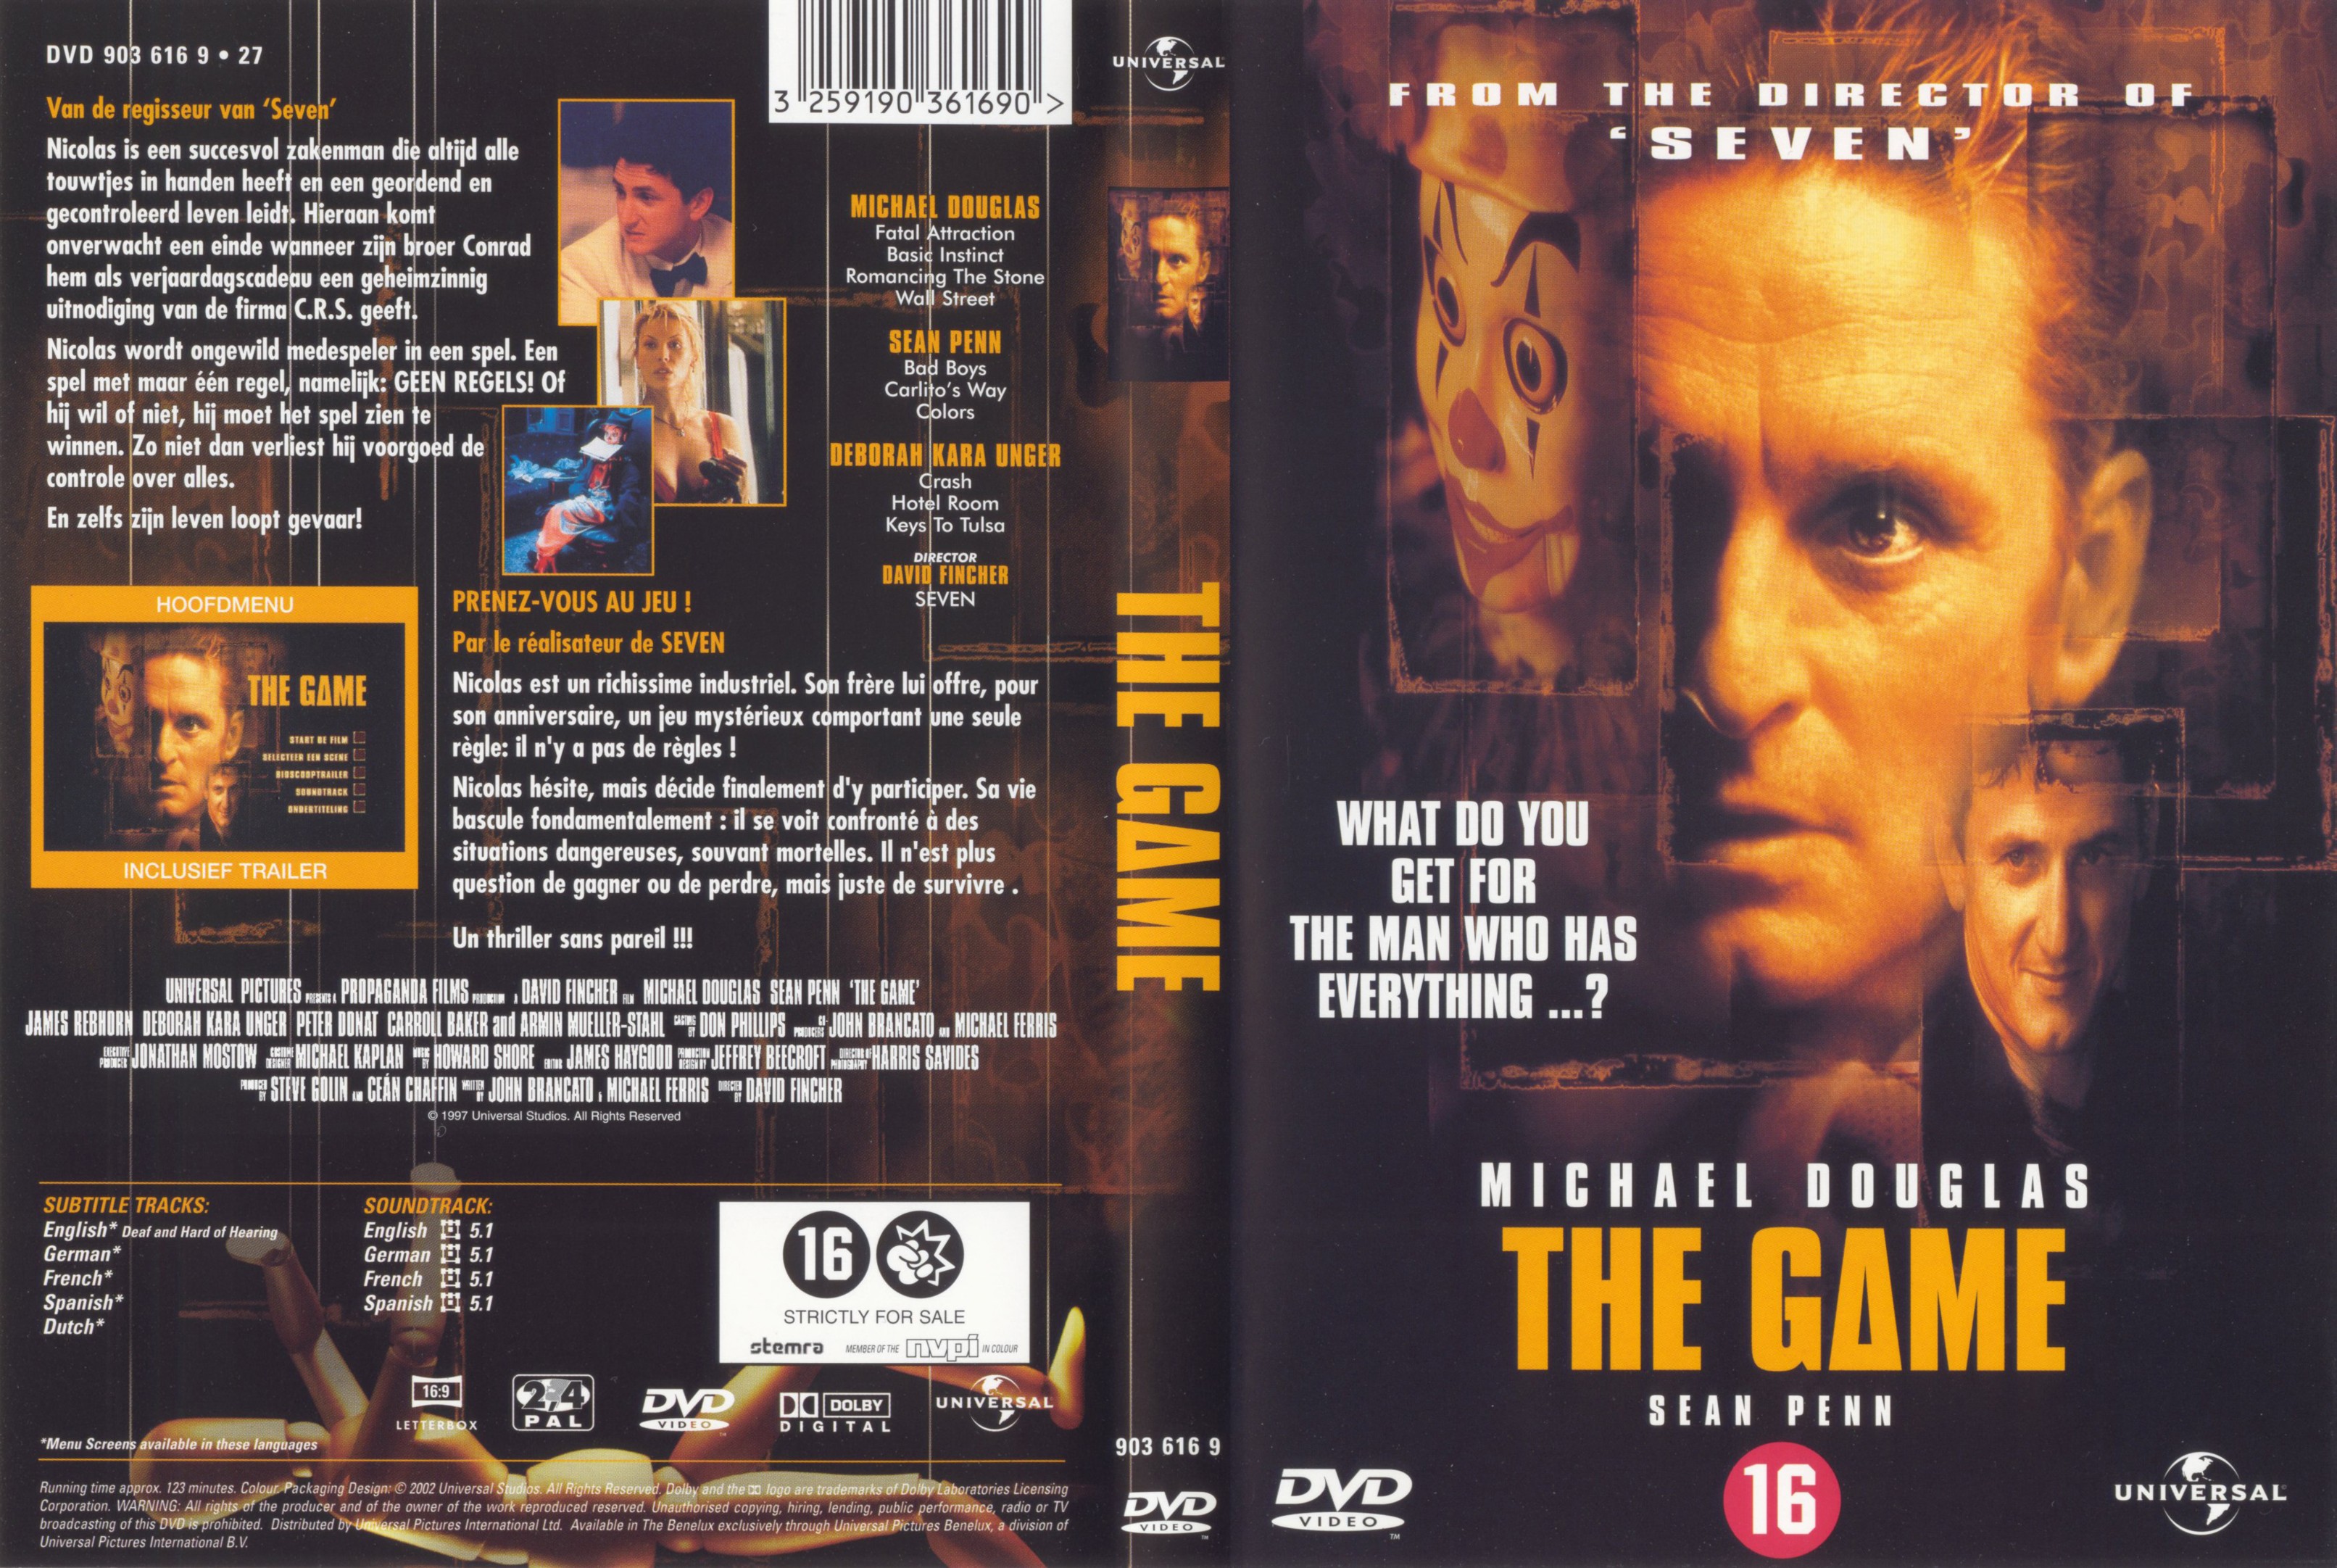 Jaquette DVD The game